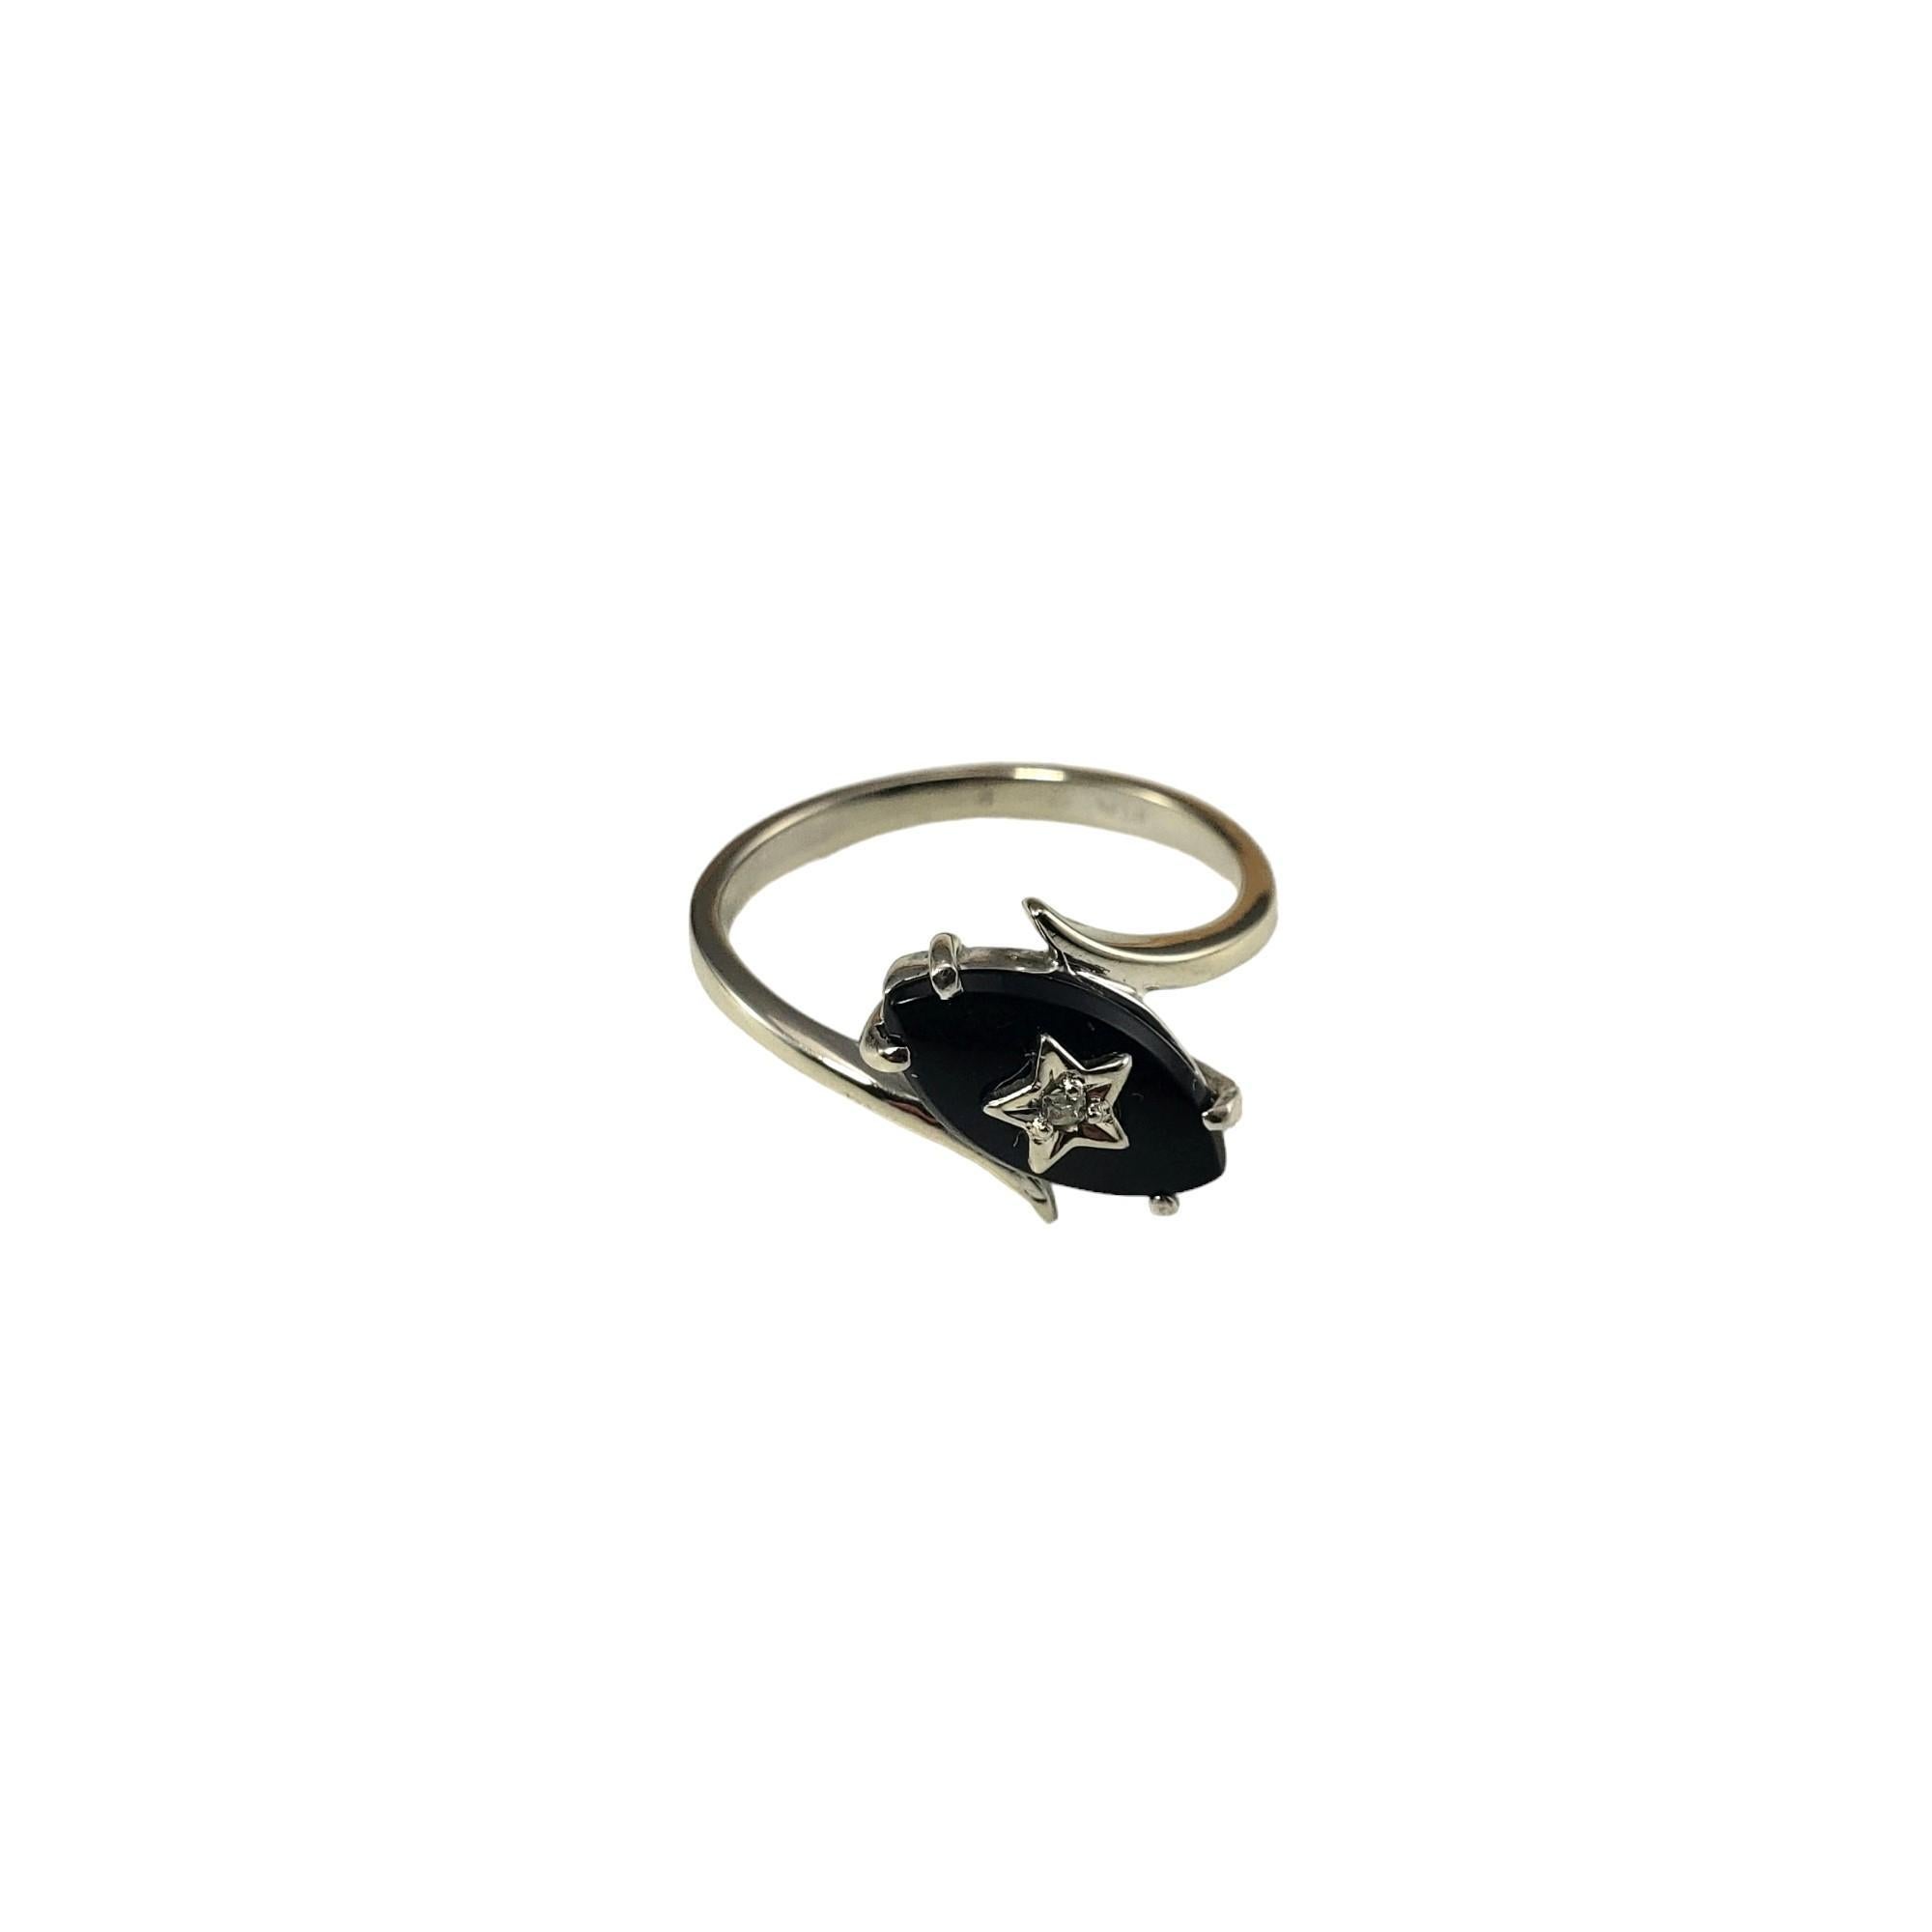 14 Karat White Gold Onyx and Diamond Ring Size 6.25

This elegant ring features one black onyx stone (12 mm x 6 mm) and one round table cut diamond set in classic 14K white gold. 

Shank: 2 mm.

Approximate total diamond weight: 0.02 ct.

Diamond